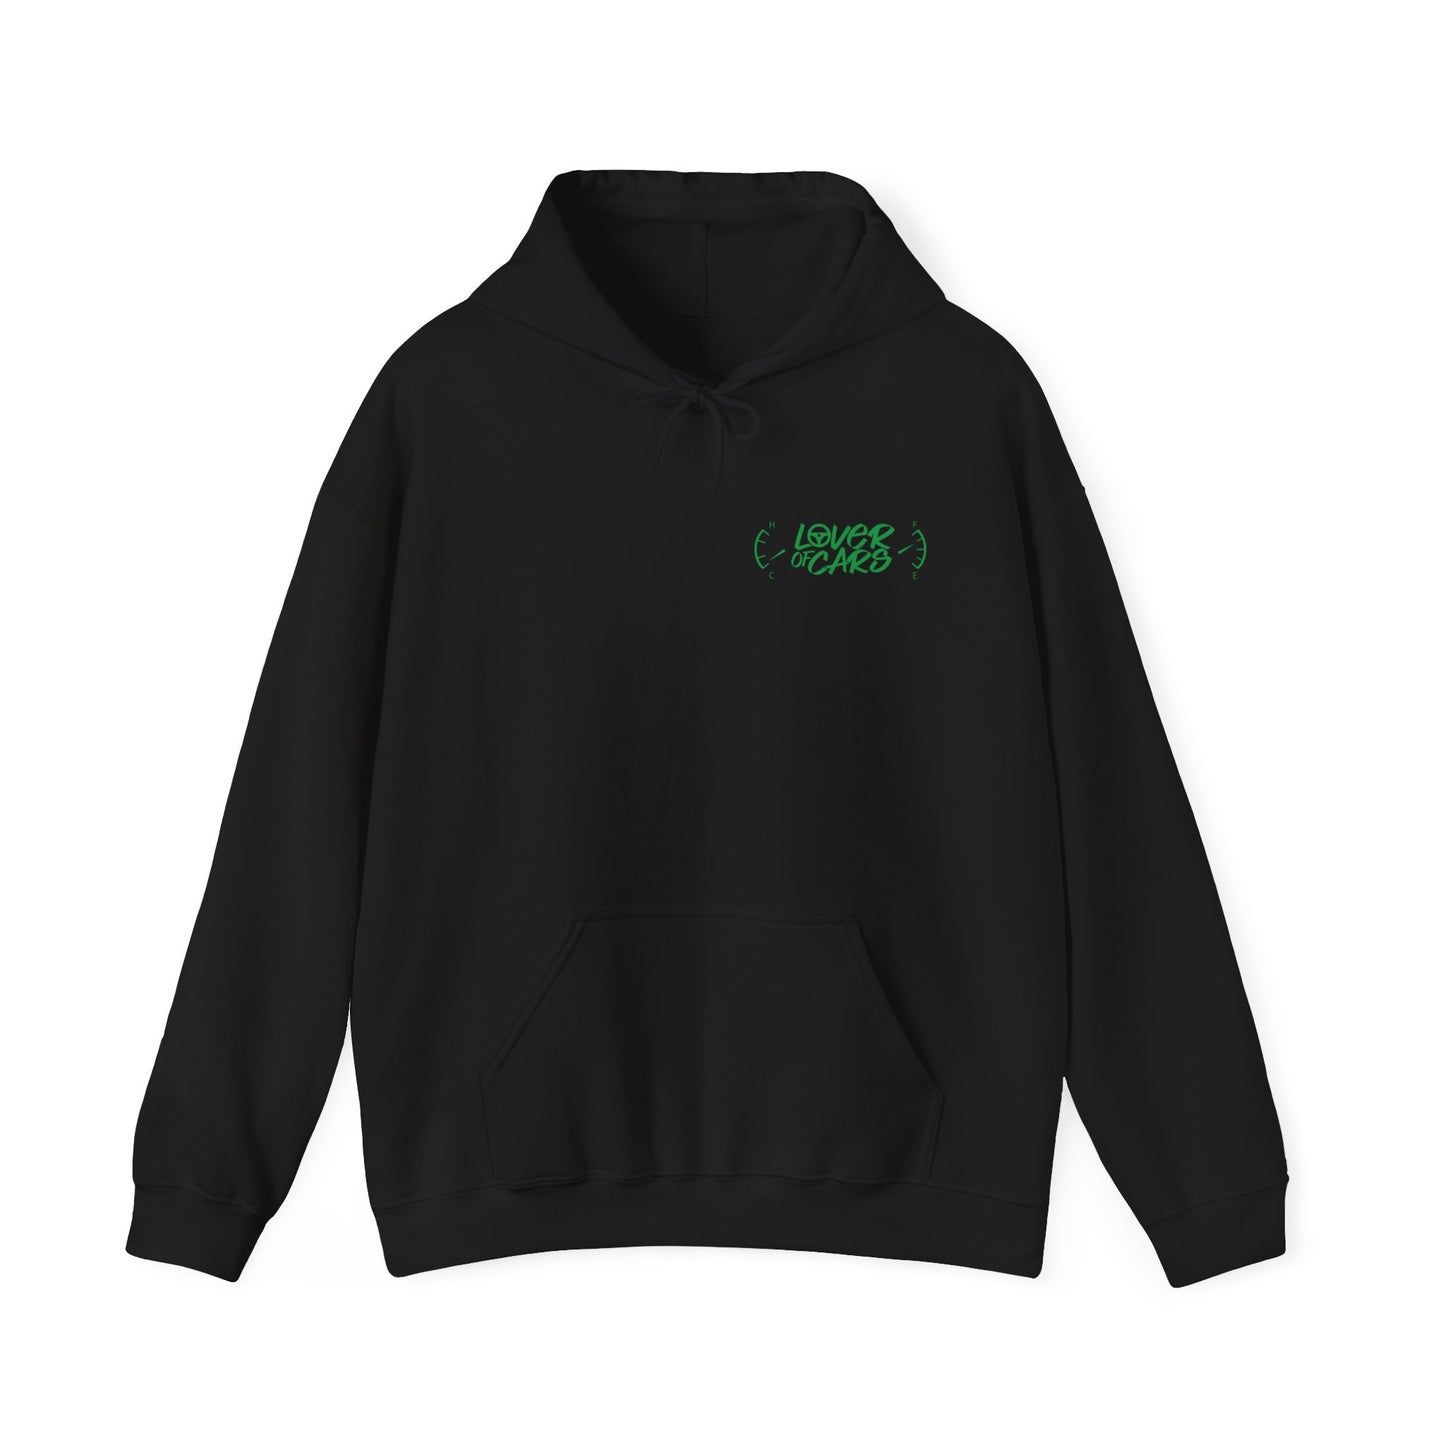 Lover Of Cars 'Now Then' Hoodie